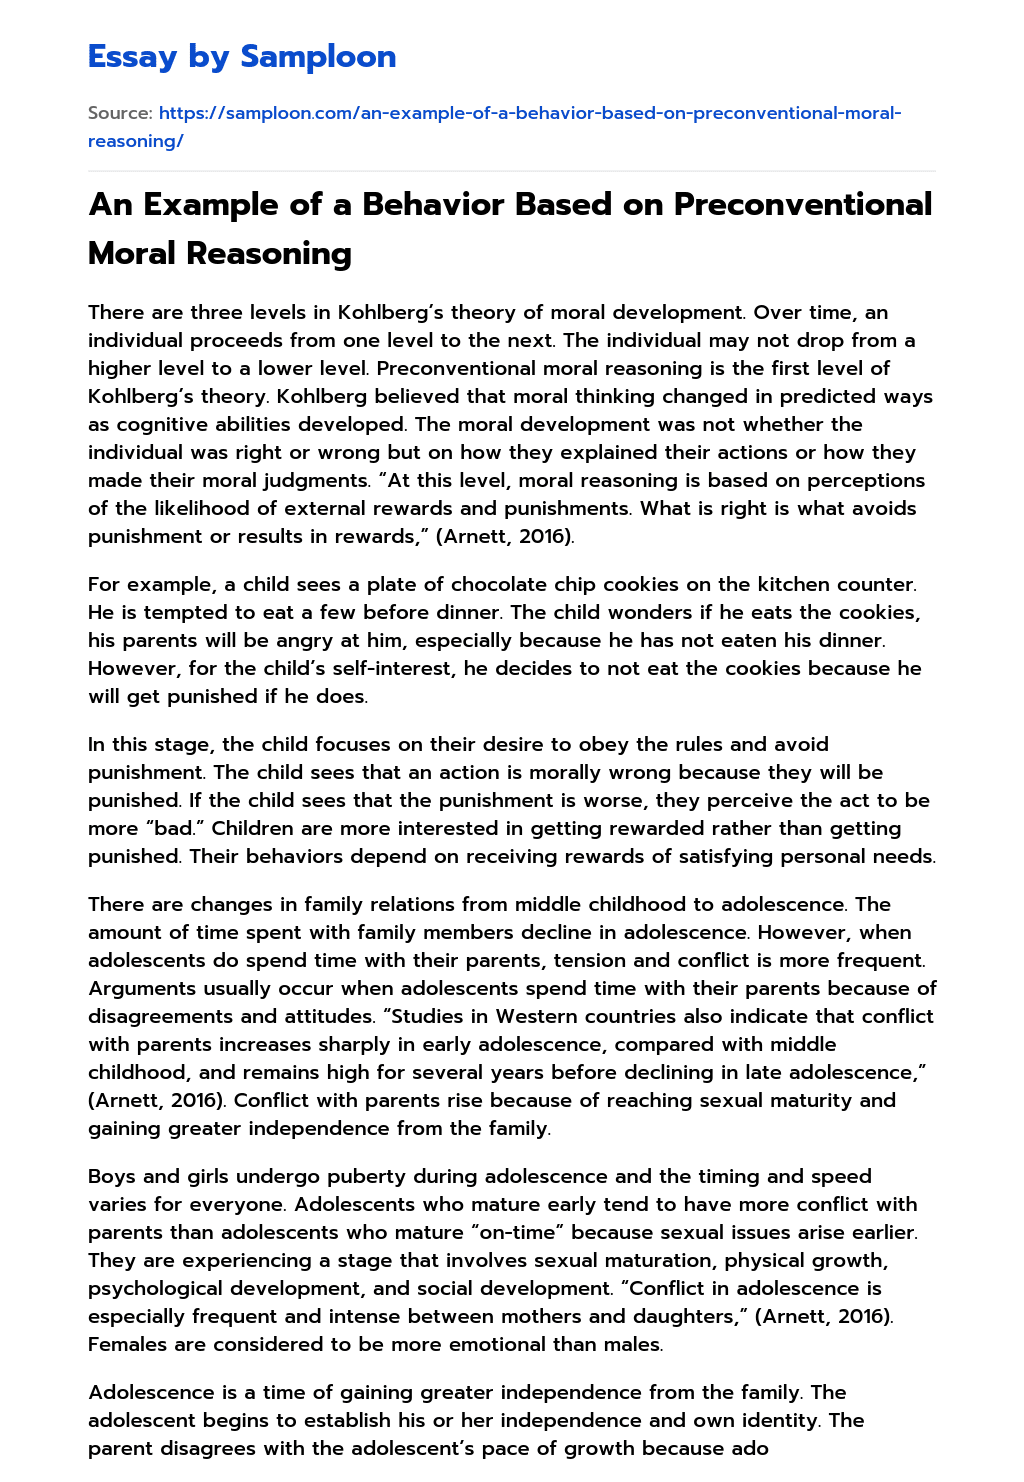 An Example of a Behavior Based on Preconventional Moral Reasoning essay